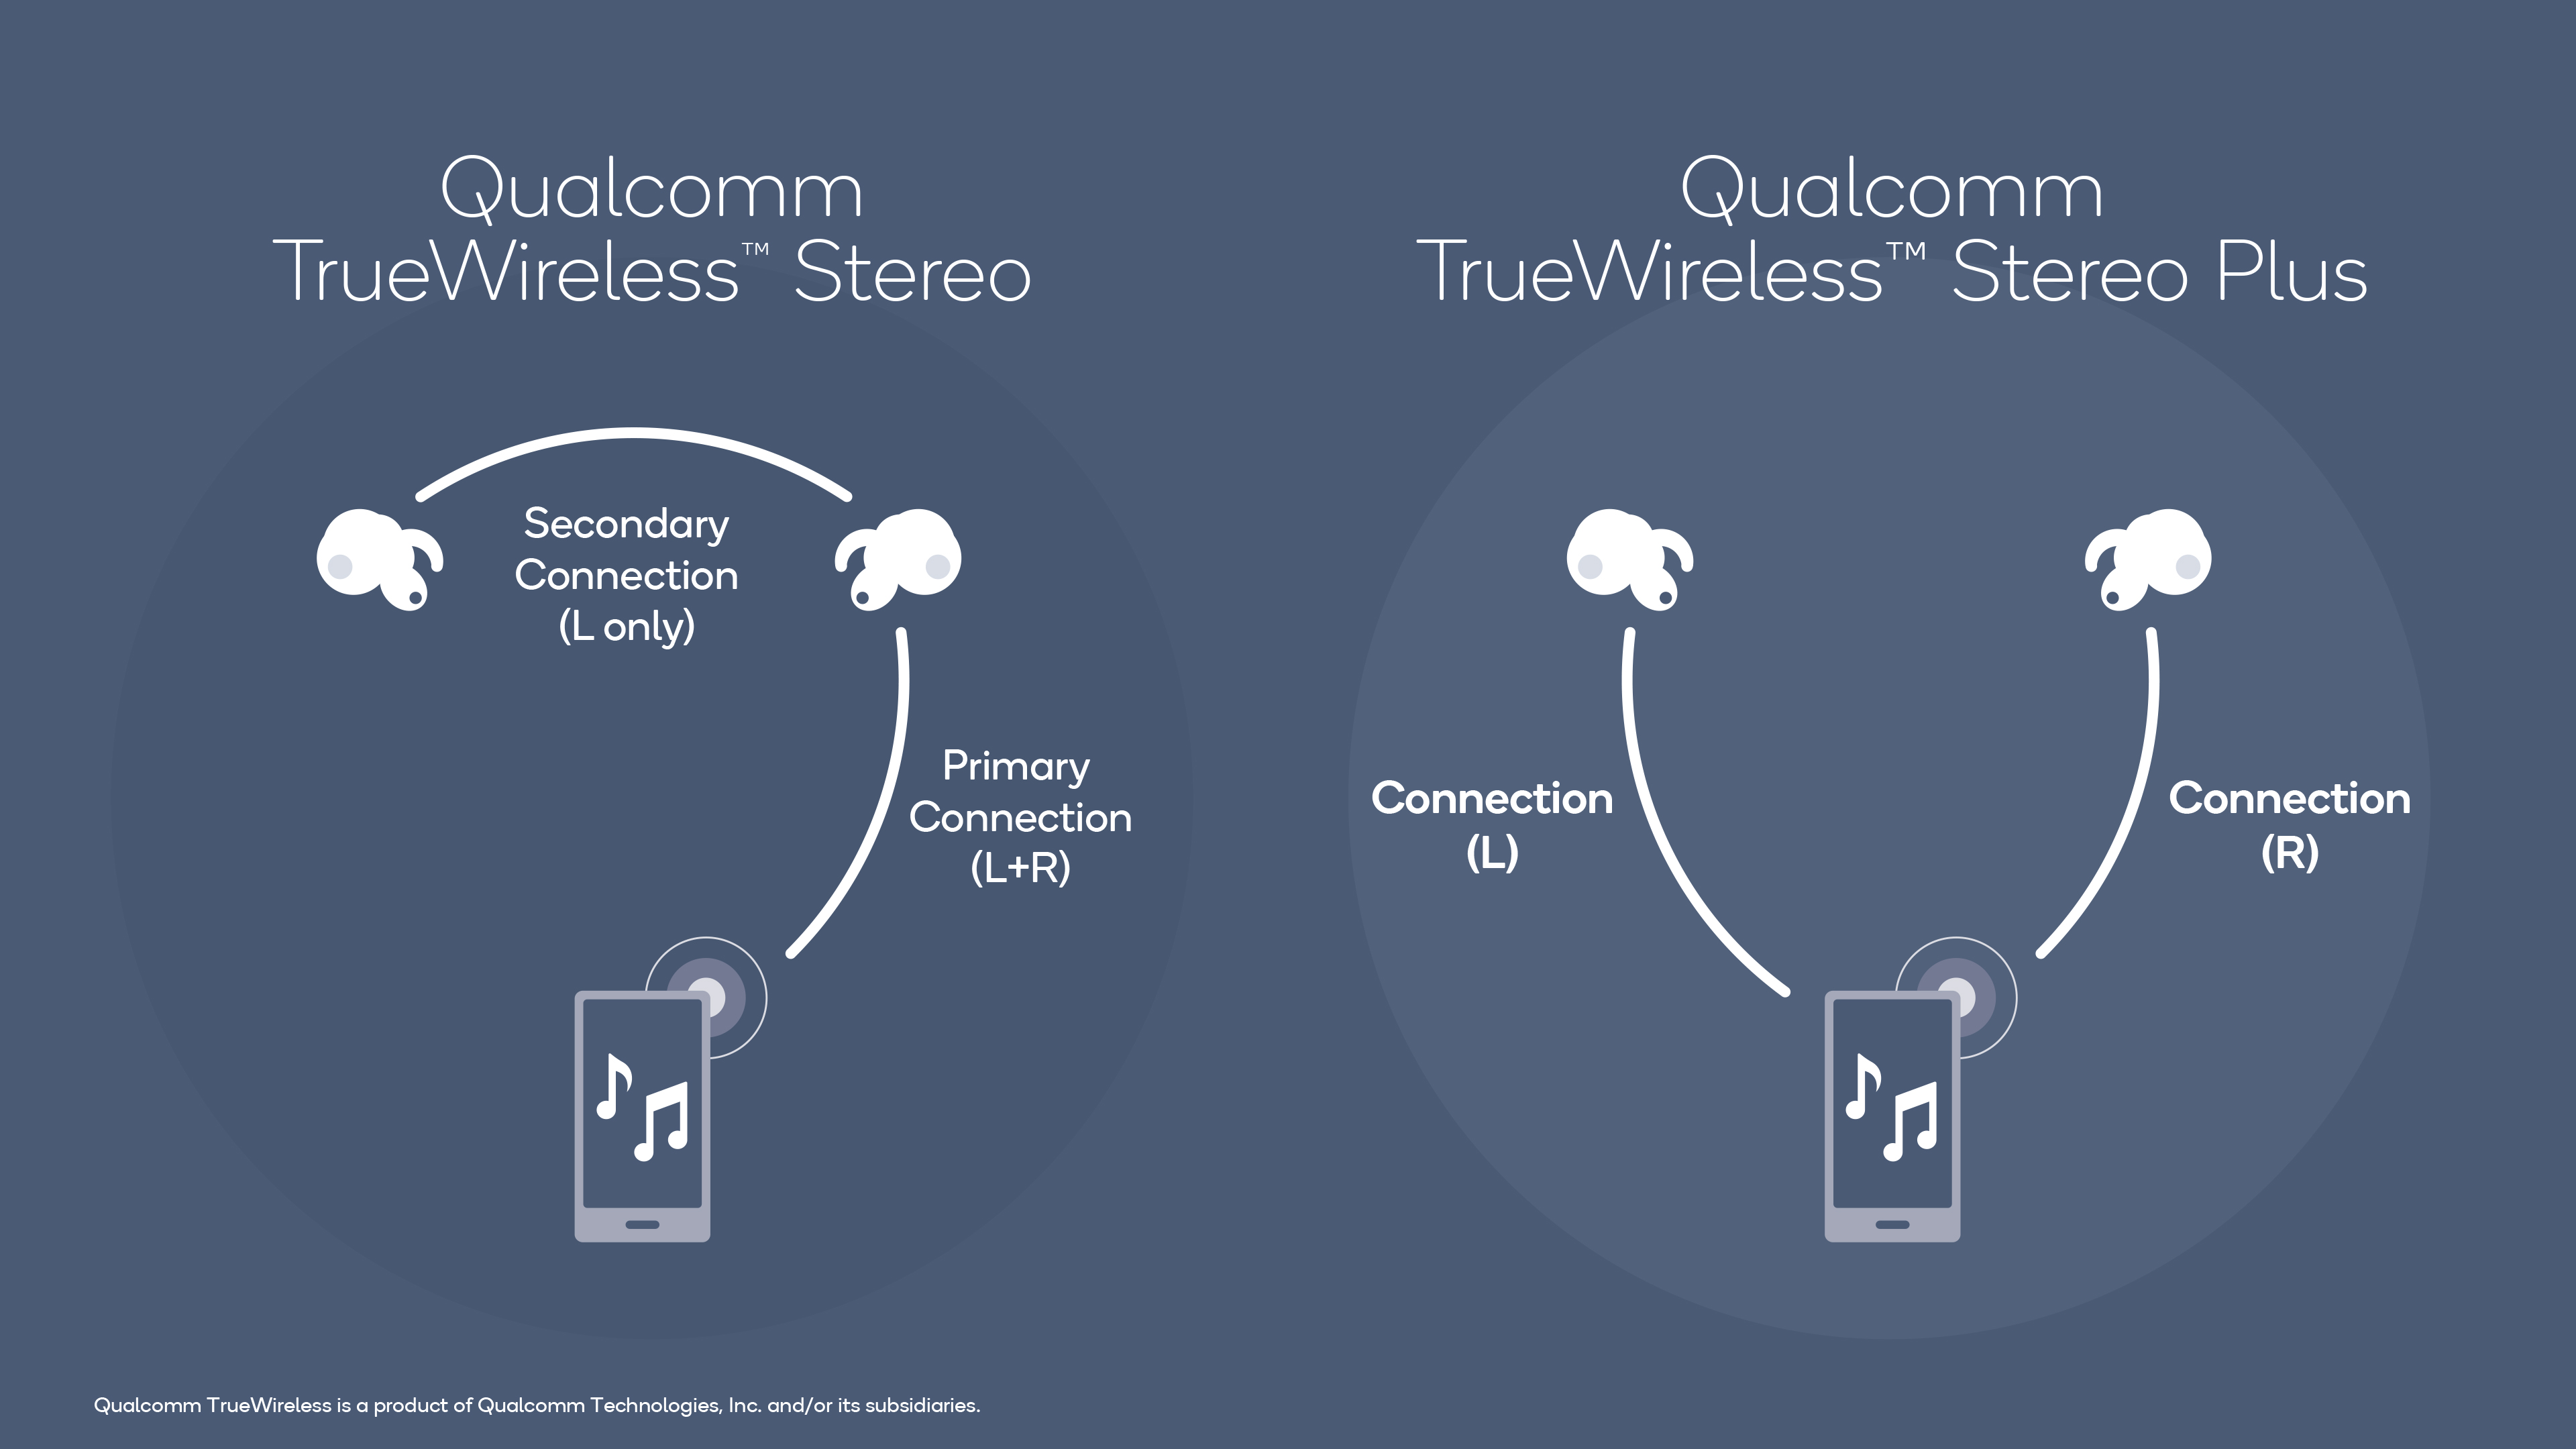 Qualcomm TrueWireless Stereo Plus allows for a simultaneous connection between the source device and left and right earbuds. This reduces latency and improves connectivity. Pictured: A diagram of Qualcomm TrueWireless Stereo technology, which sets one earbud as a primary and the latter as a secondary receiver. On the right side is Qualcomm TrueWireless Stereo Plus, which simultaneously communicates with both earbuds.